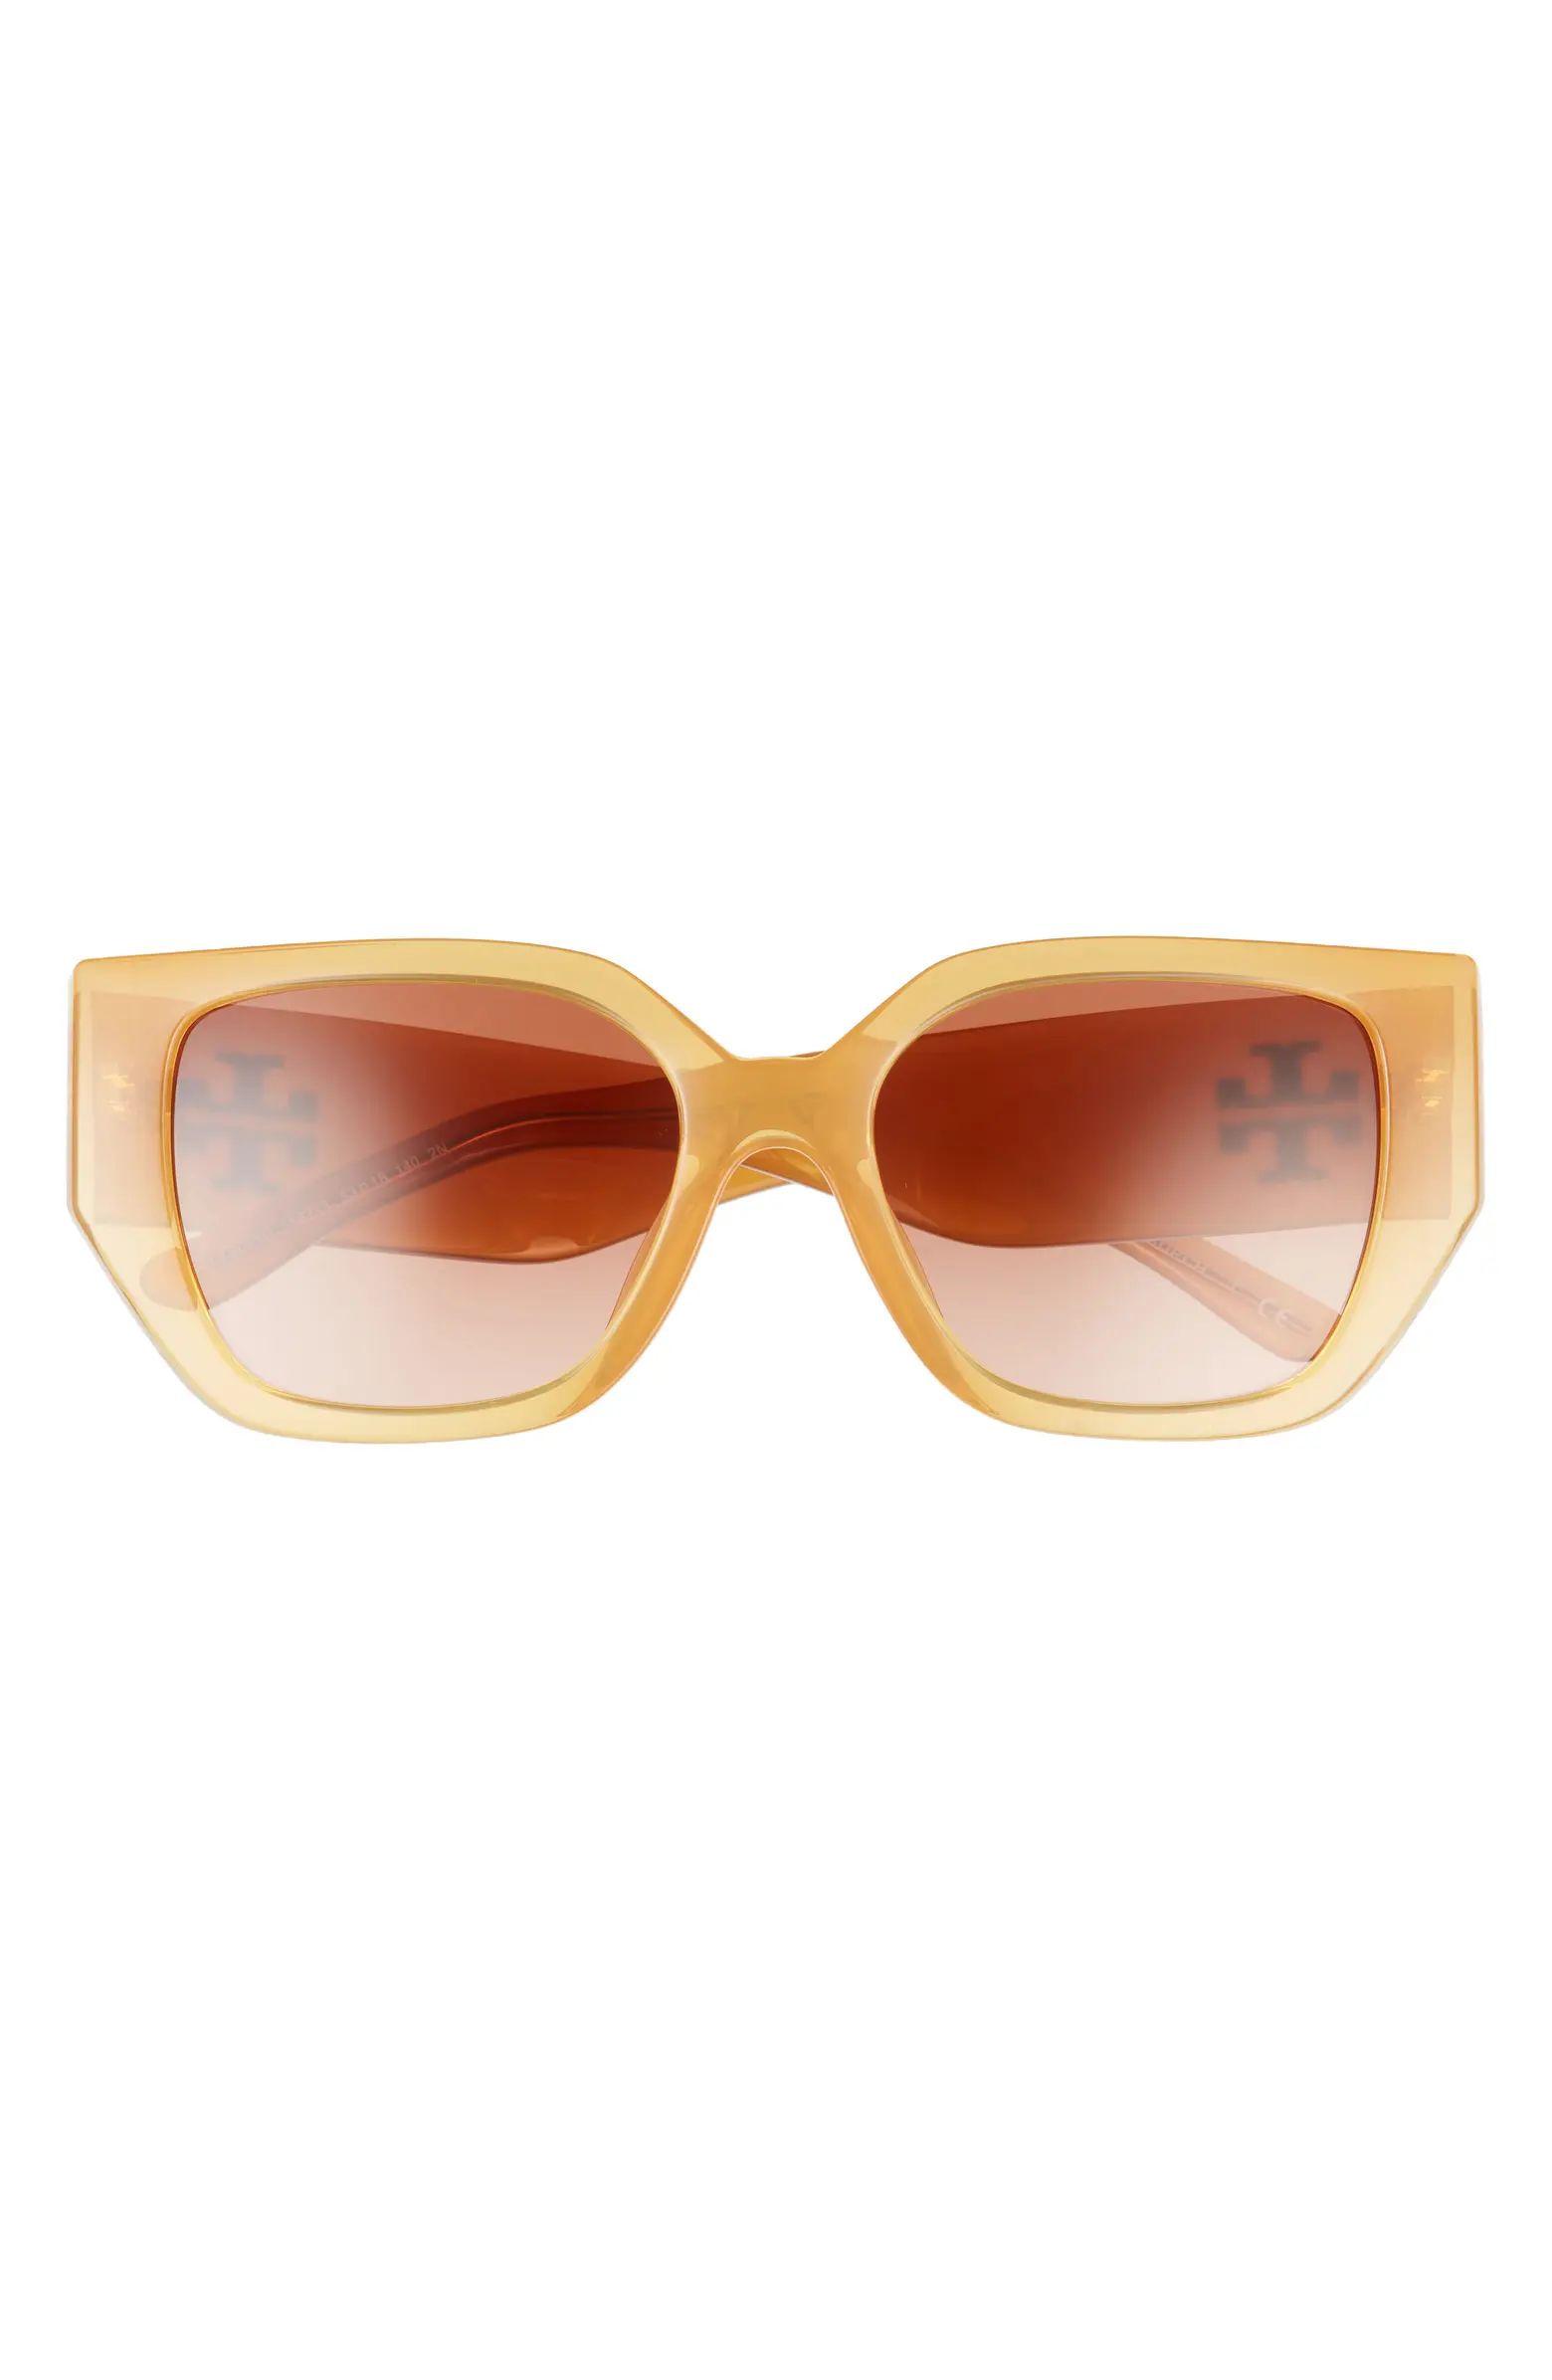 Tory Burch 53mm Rectangle Sunglasses | Nordstrom | Nordstrom